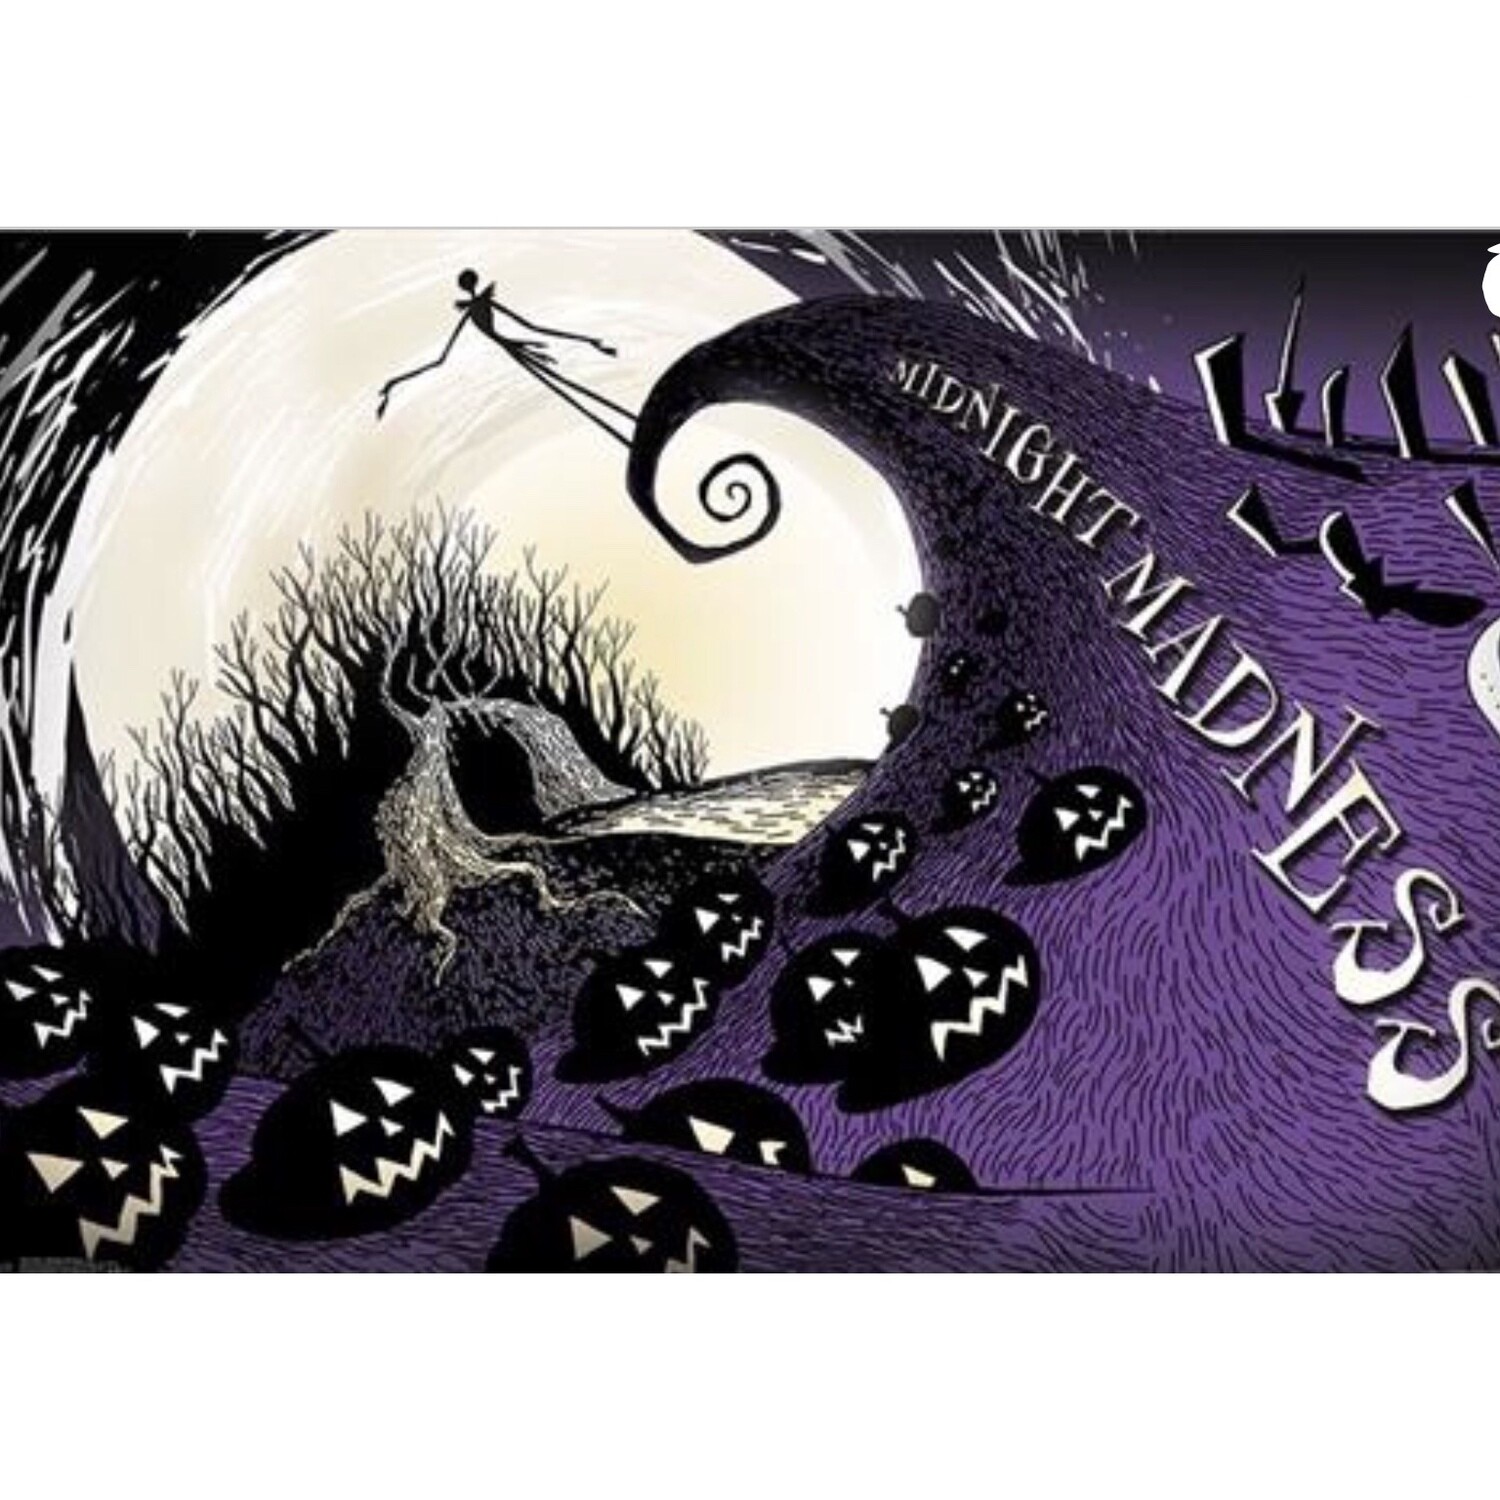 NIGHTMARE BEFORE CHRISTMAS MIDNIGHT MADNESS POSTER